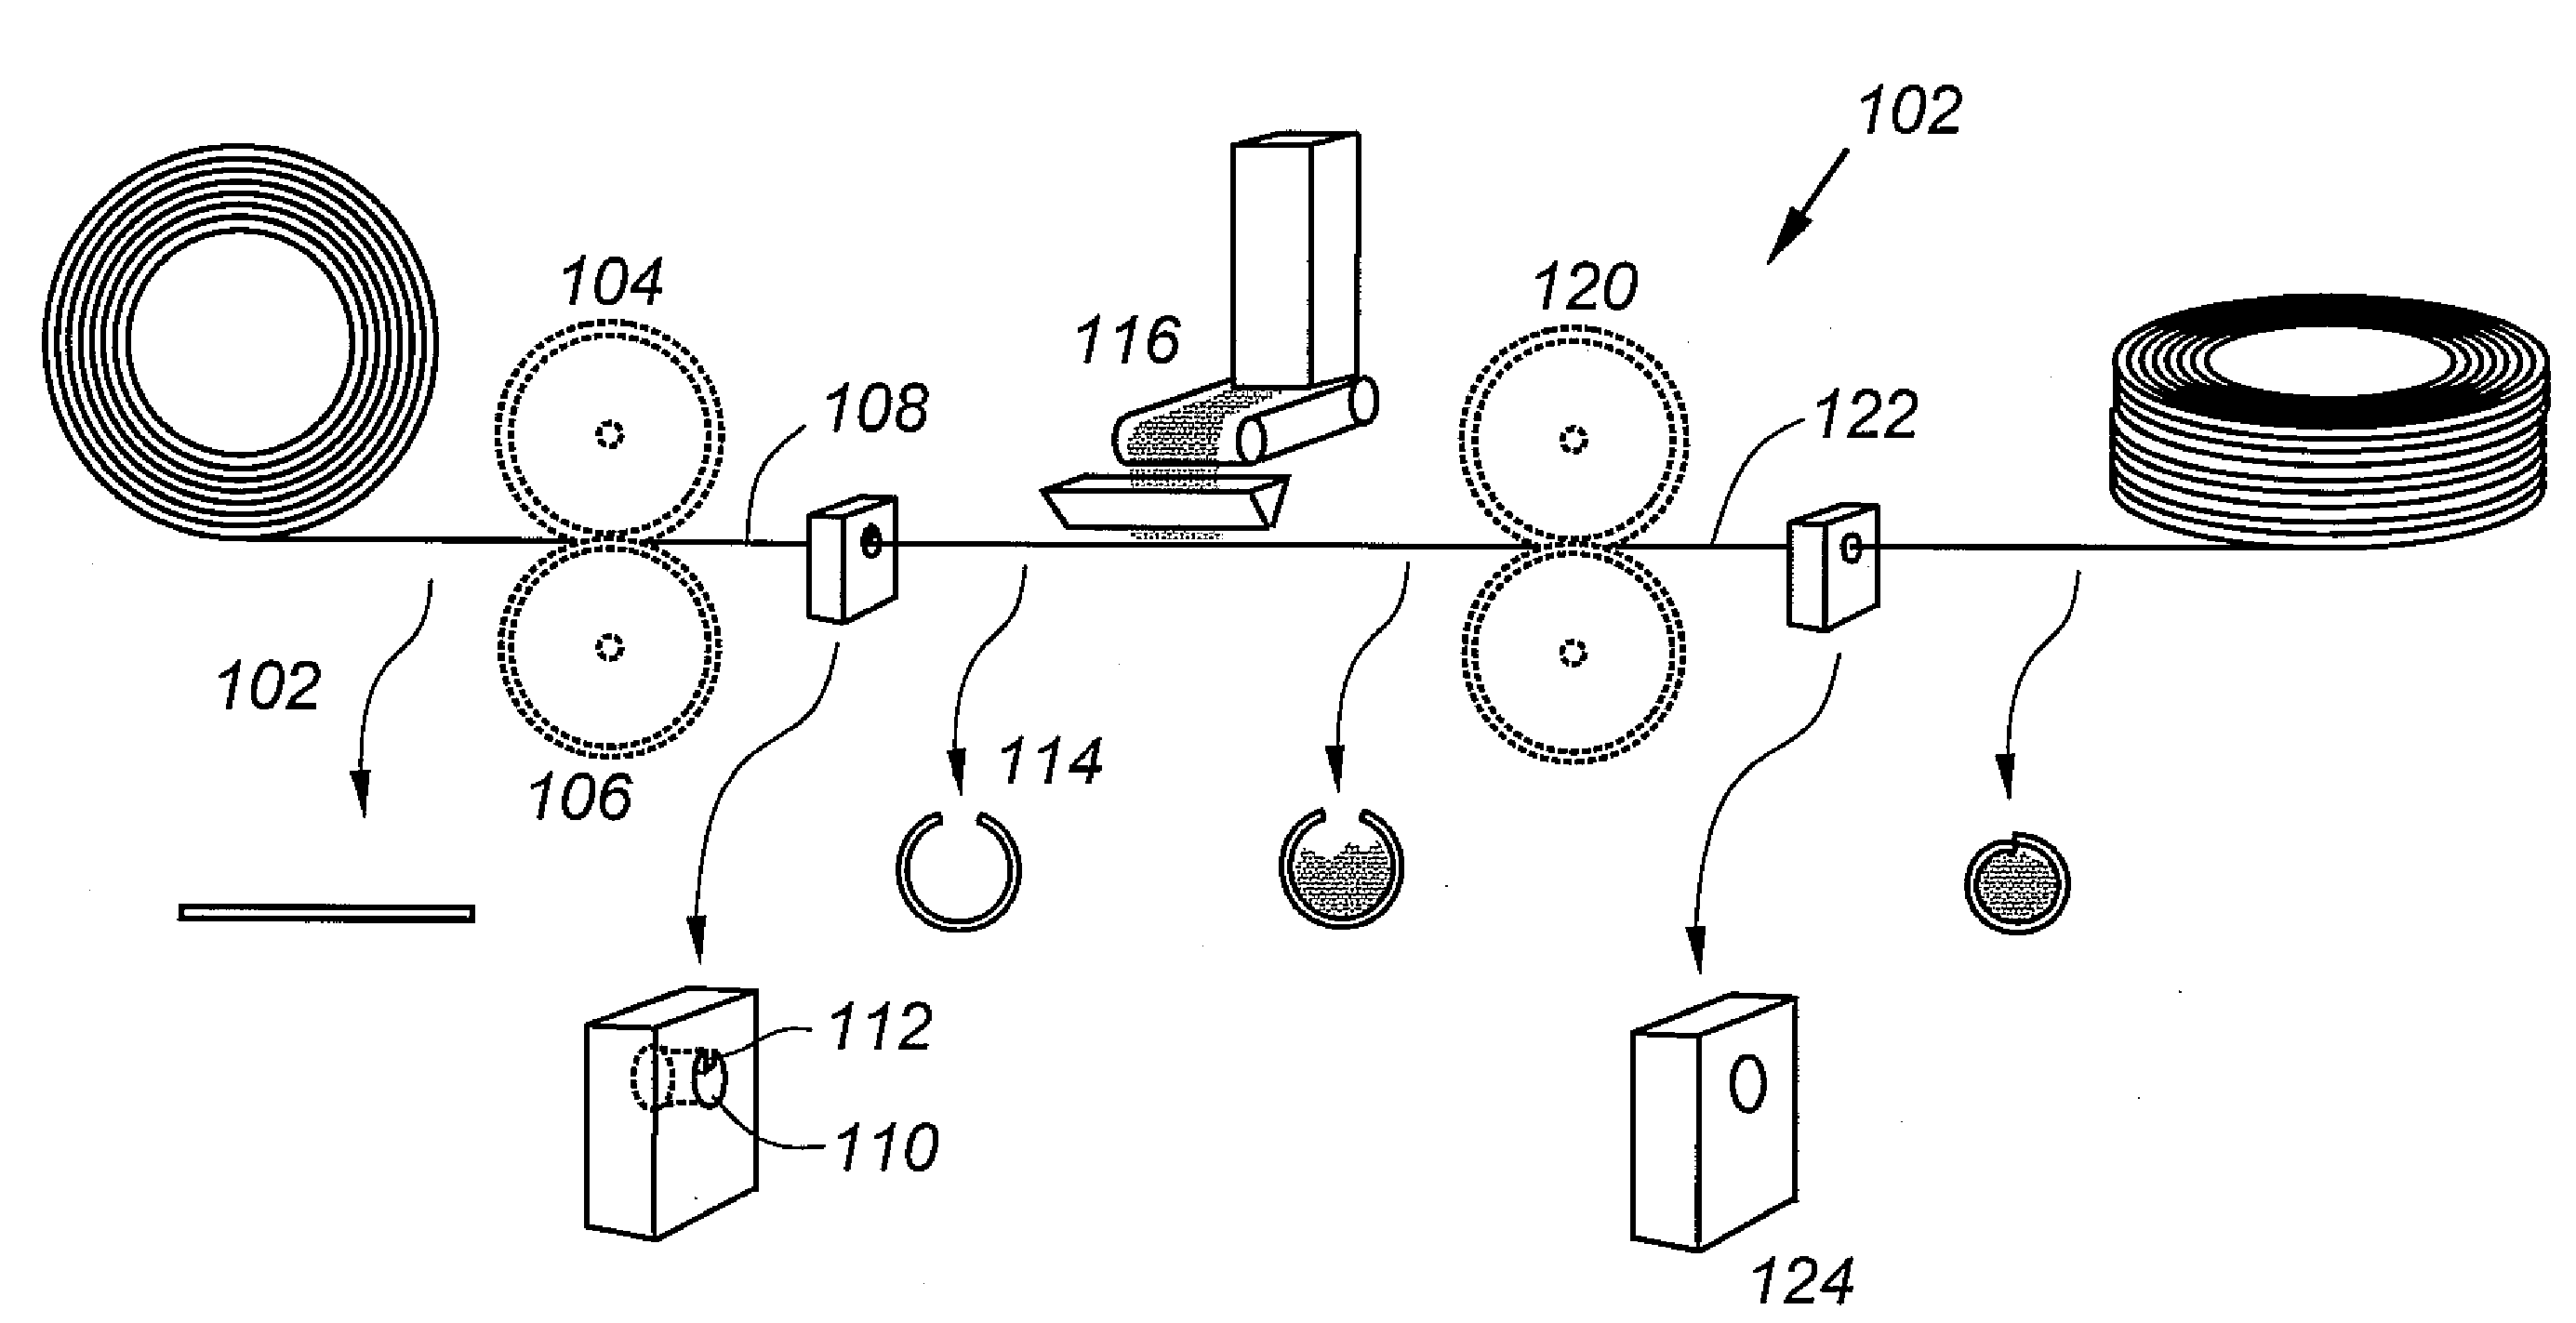 Simplified method and apparatus for making cored wire and other tubular products